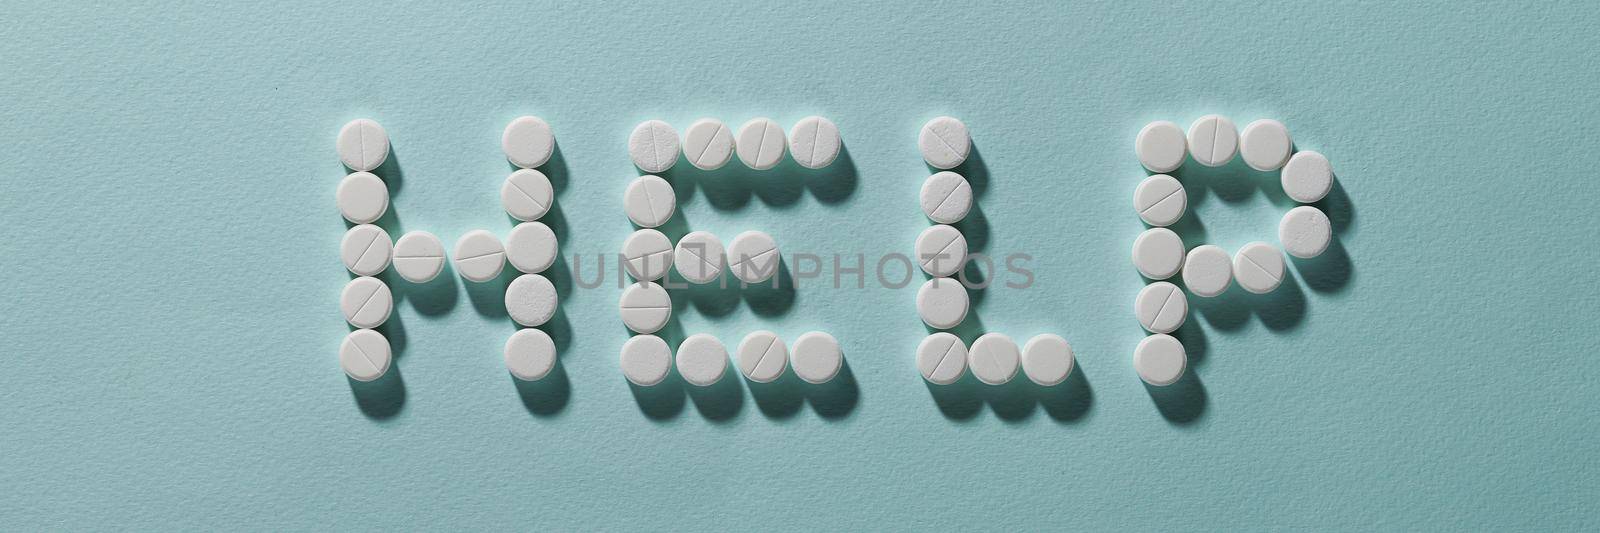 Top view of help lettering made with pills, drug prescription for treatment, pharmaceutical medicament, oral tablets. Medicine help, healthcare, illness, support organism concept